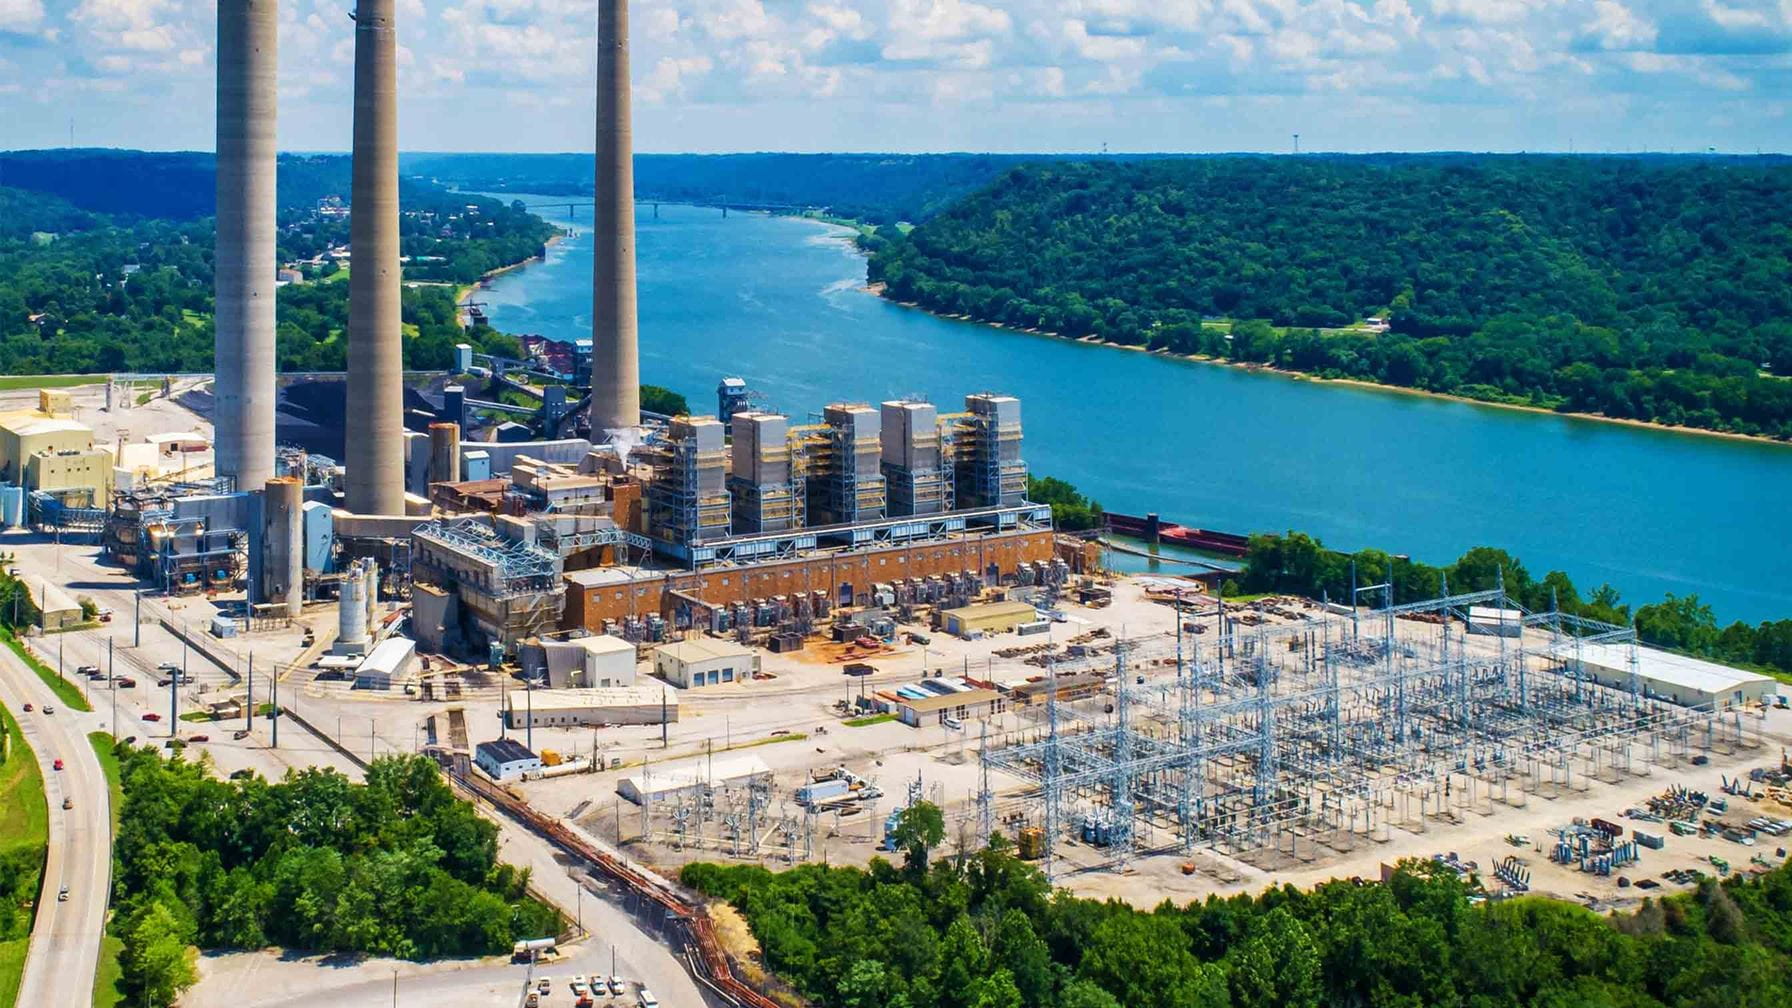 Upgrading to a natural gas plant on time